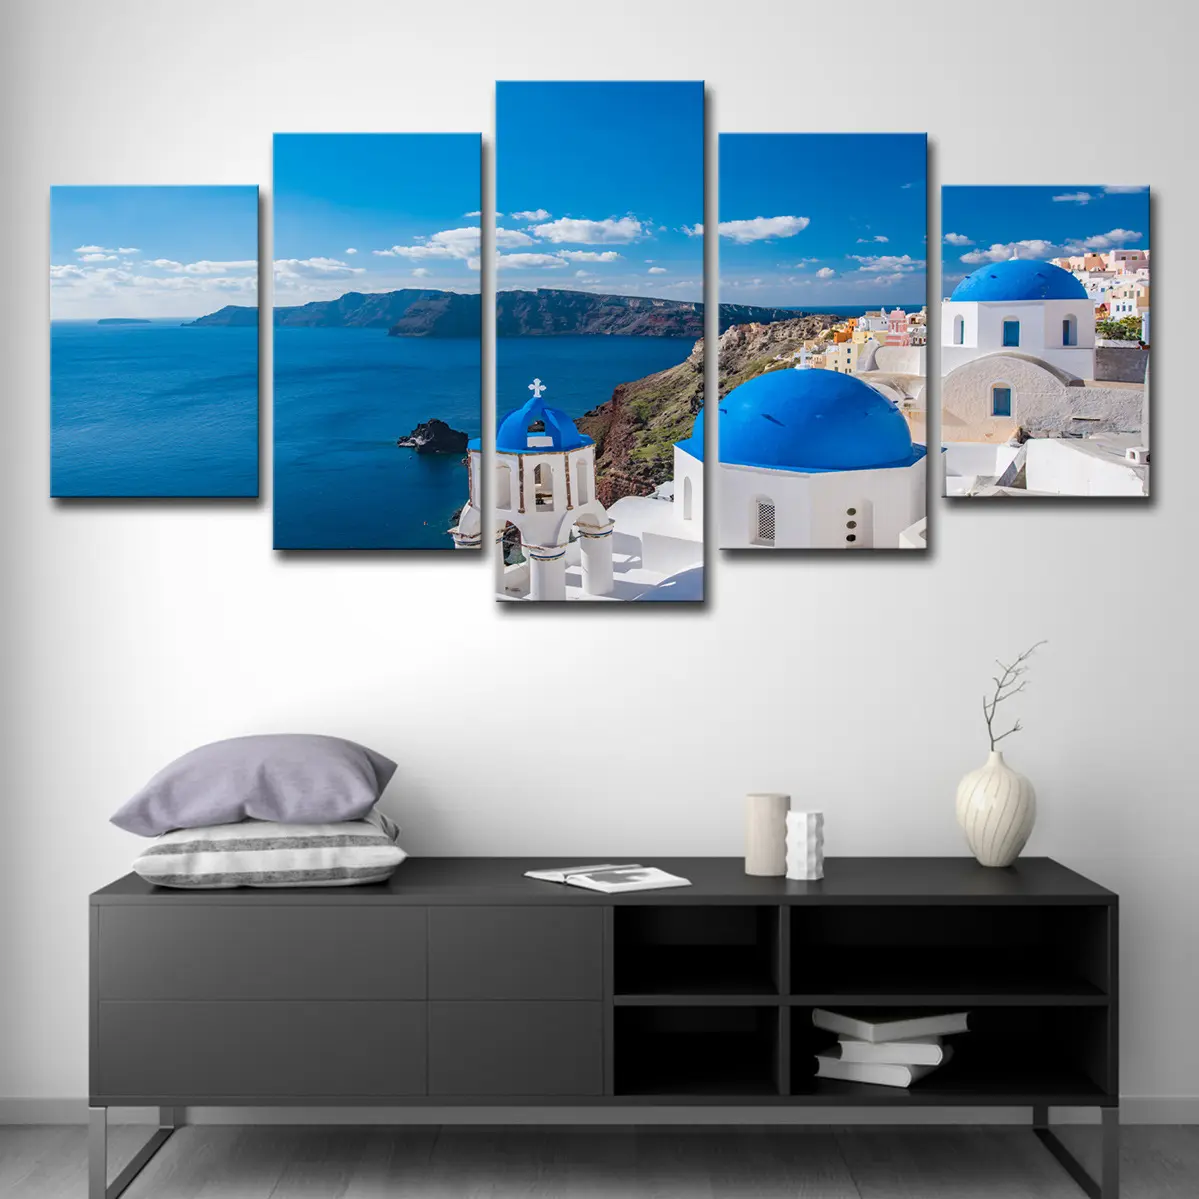 5 Panel Paintings And Wall Arts Canvas Hd Print Painting Seaside City Landscape Wall Decoration Posters And Pictures